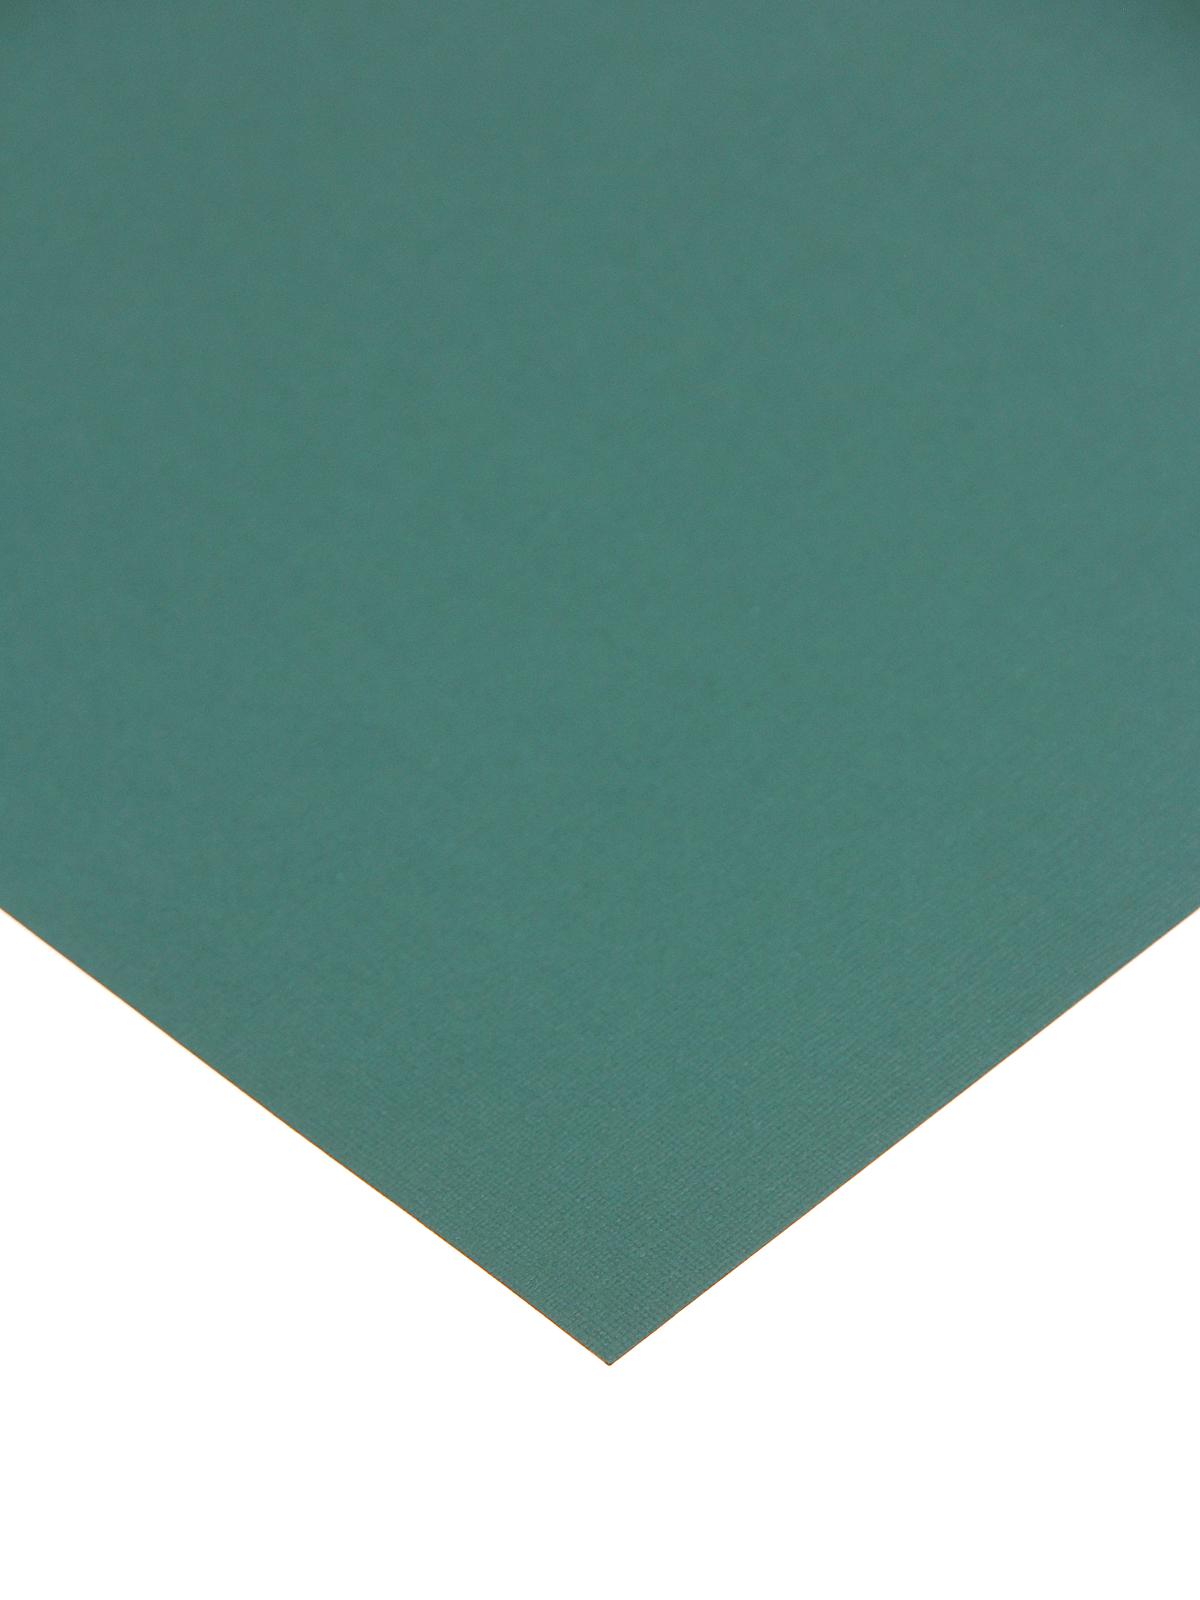 80 Lb. Canvas 12 In. X 12 In. Sheet Evergreen